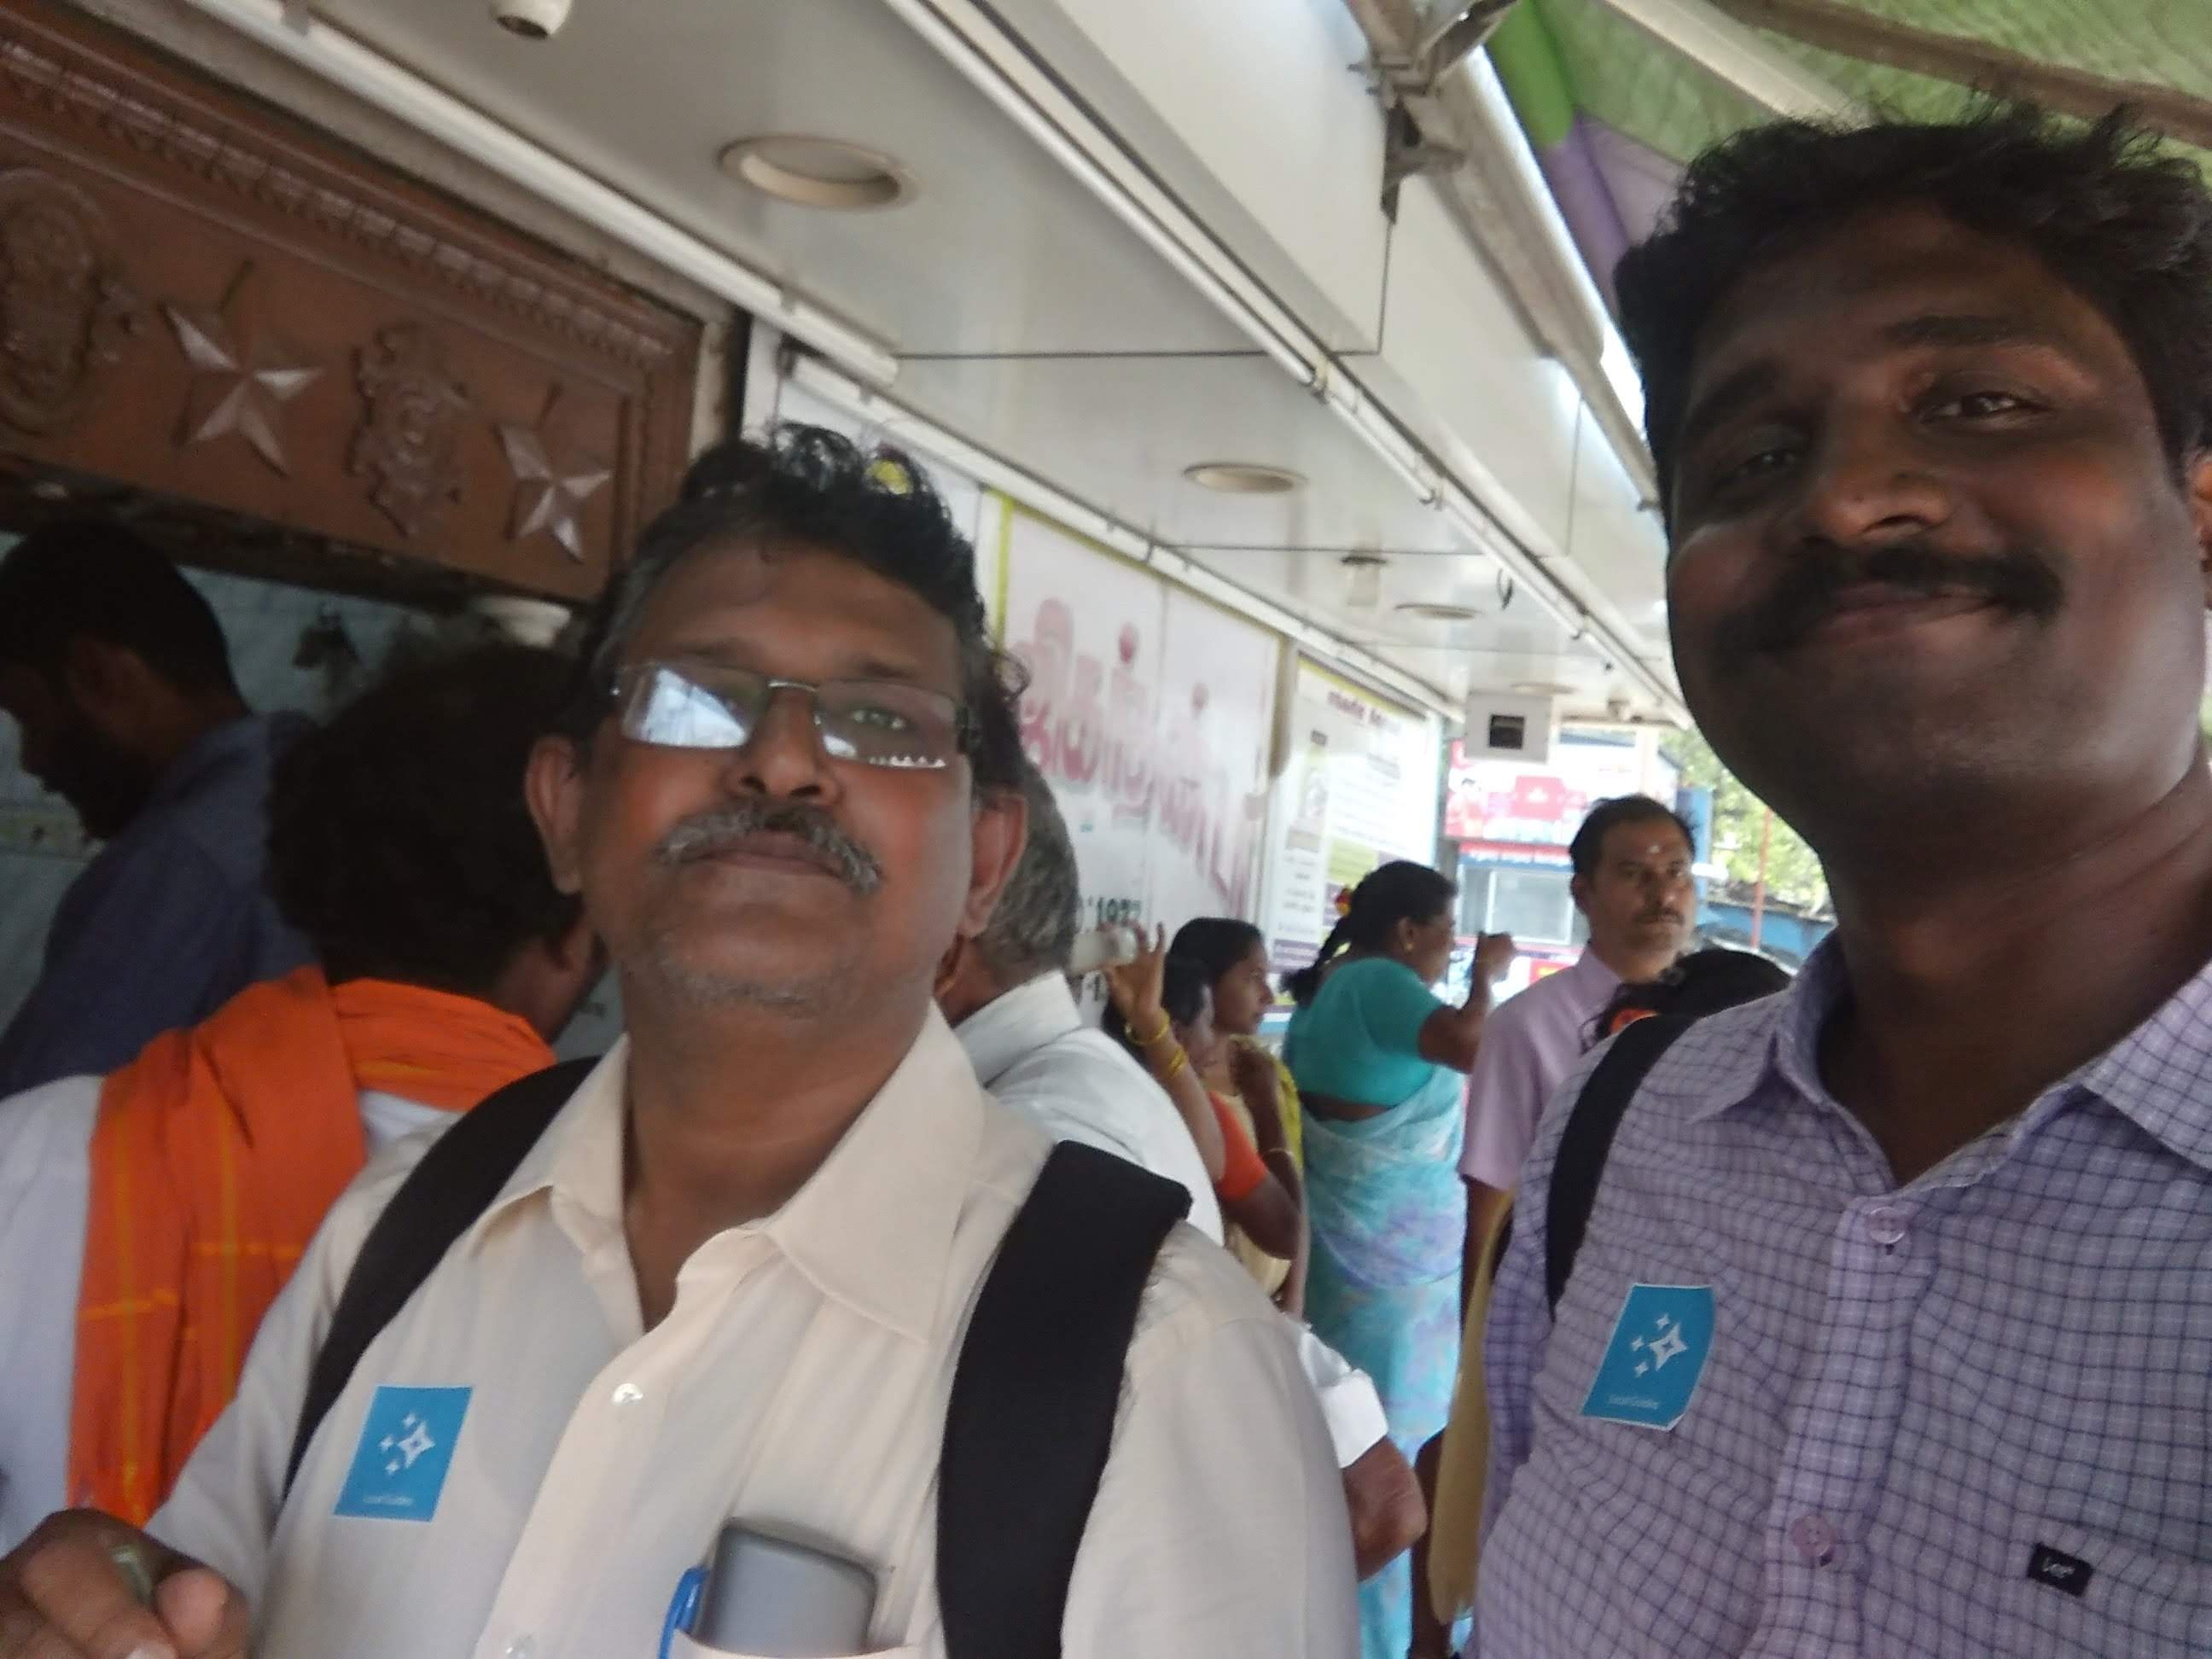 New Local Guides friend from Kerala came for madurai meetup